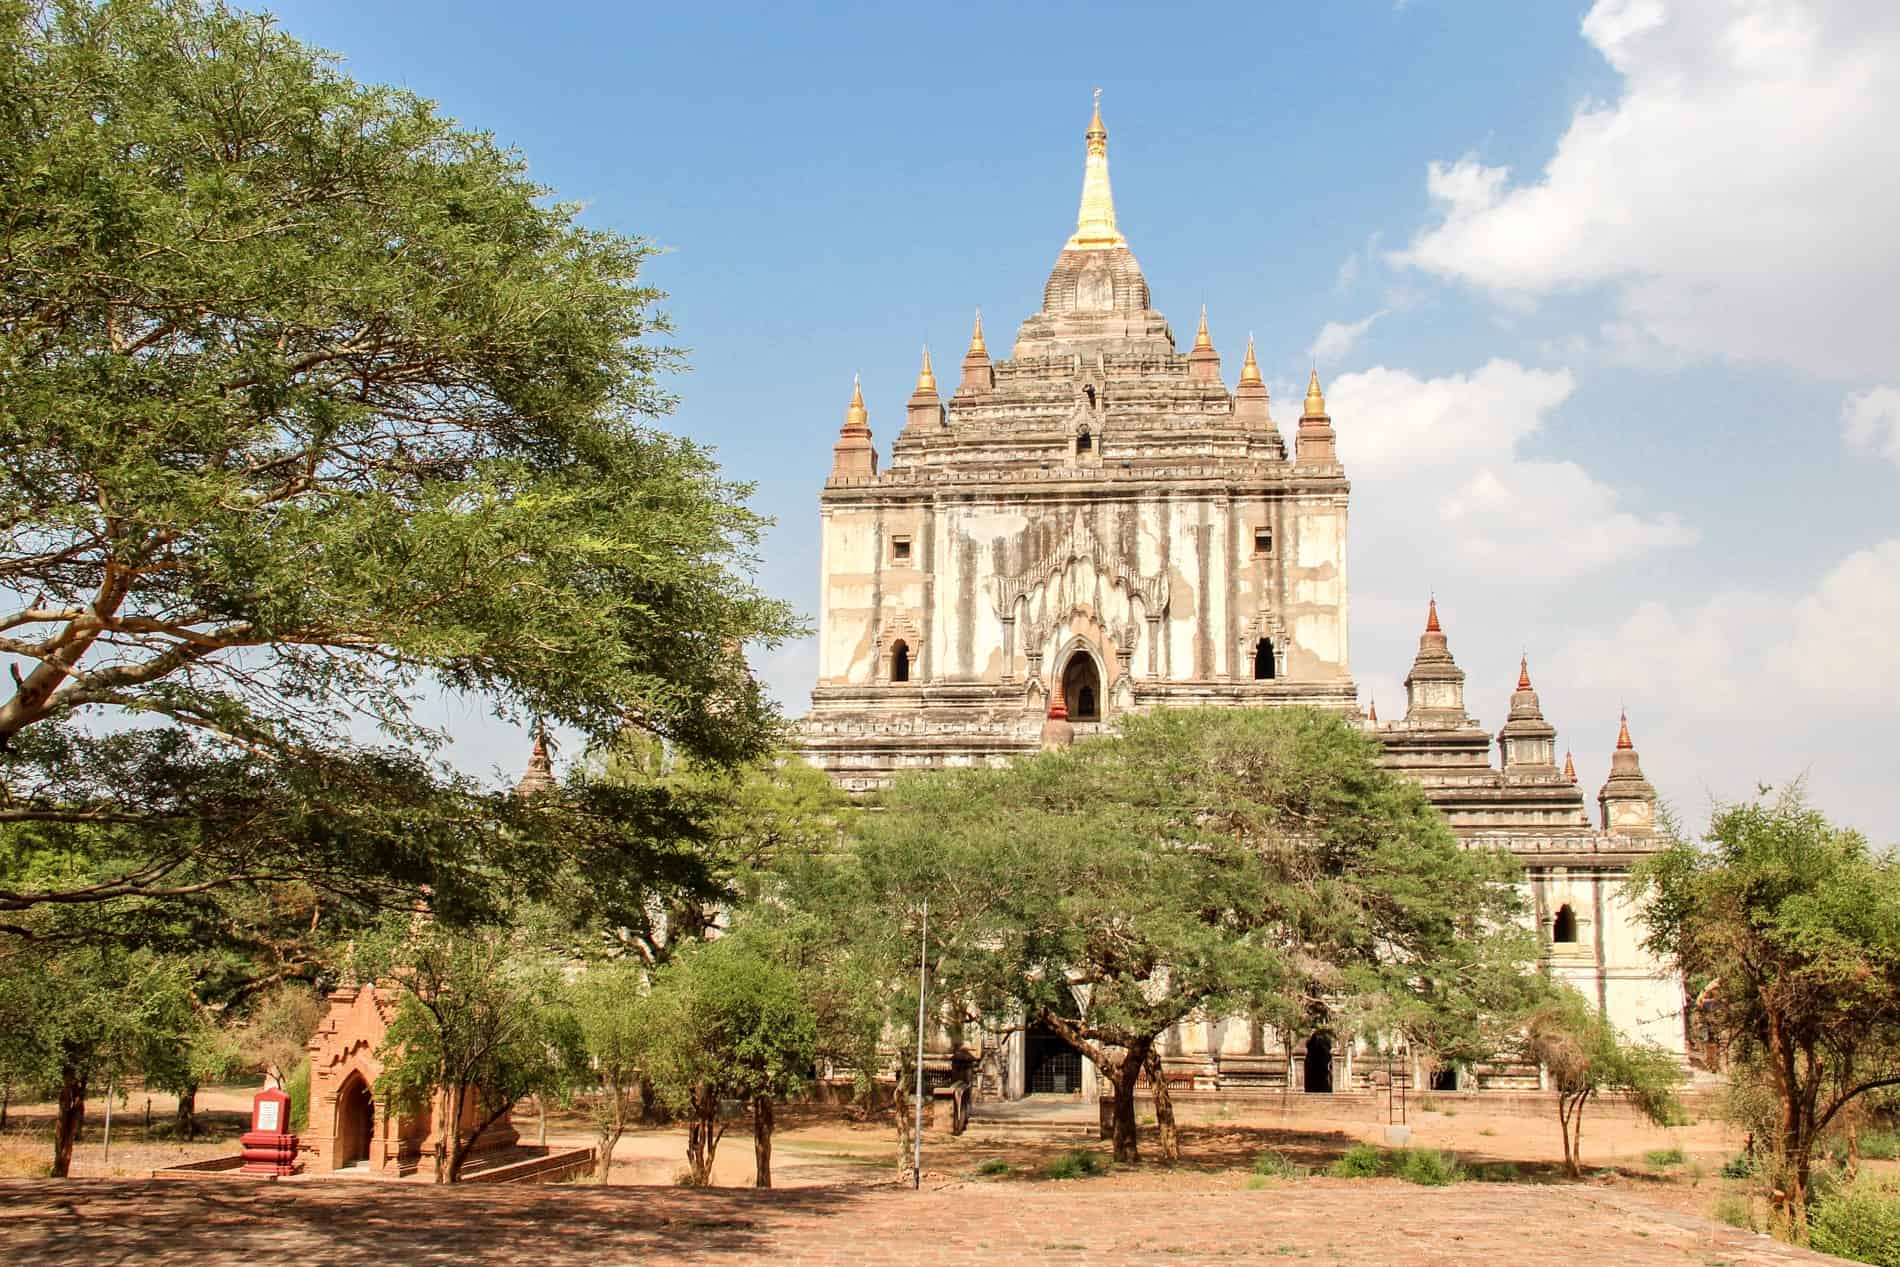 The large tiered and spired white That Bin Nyu Temple in Bagan, set amongst trees. 